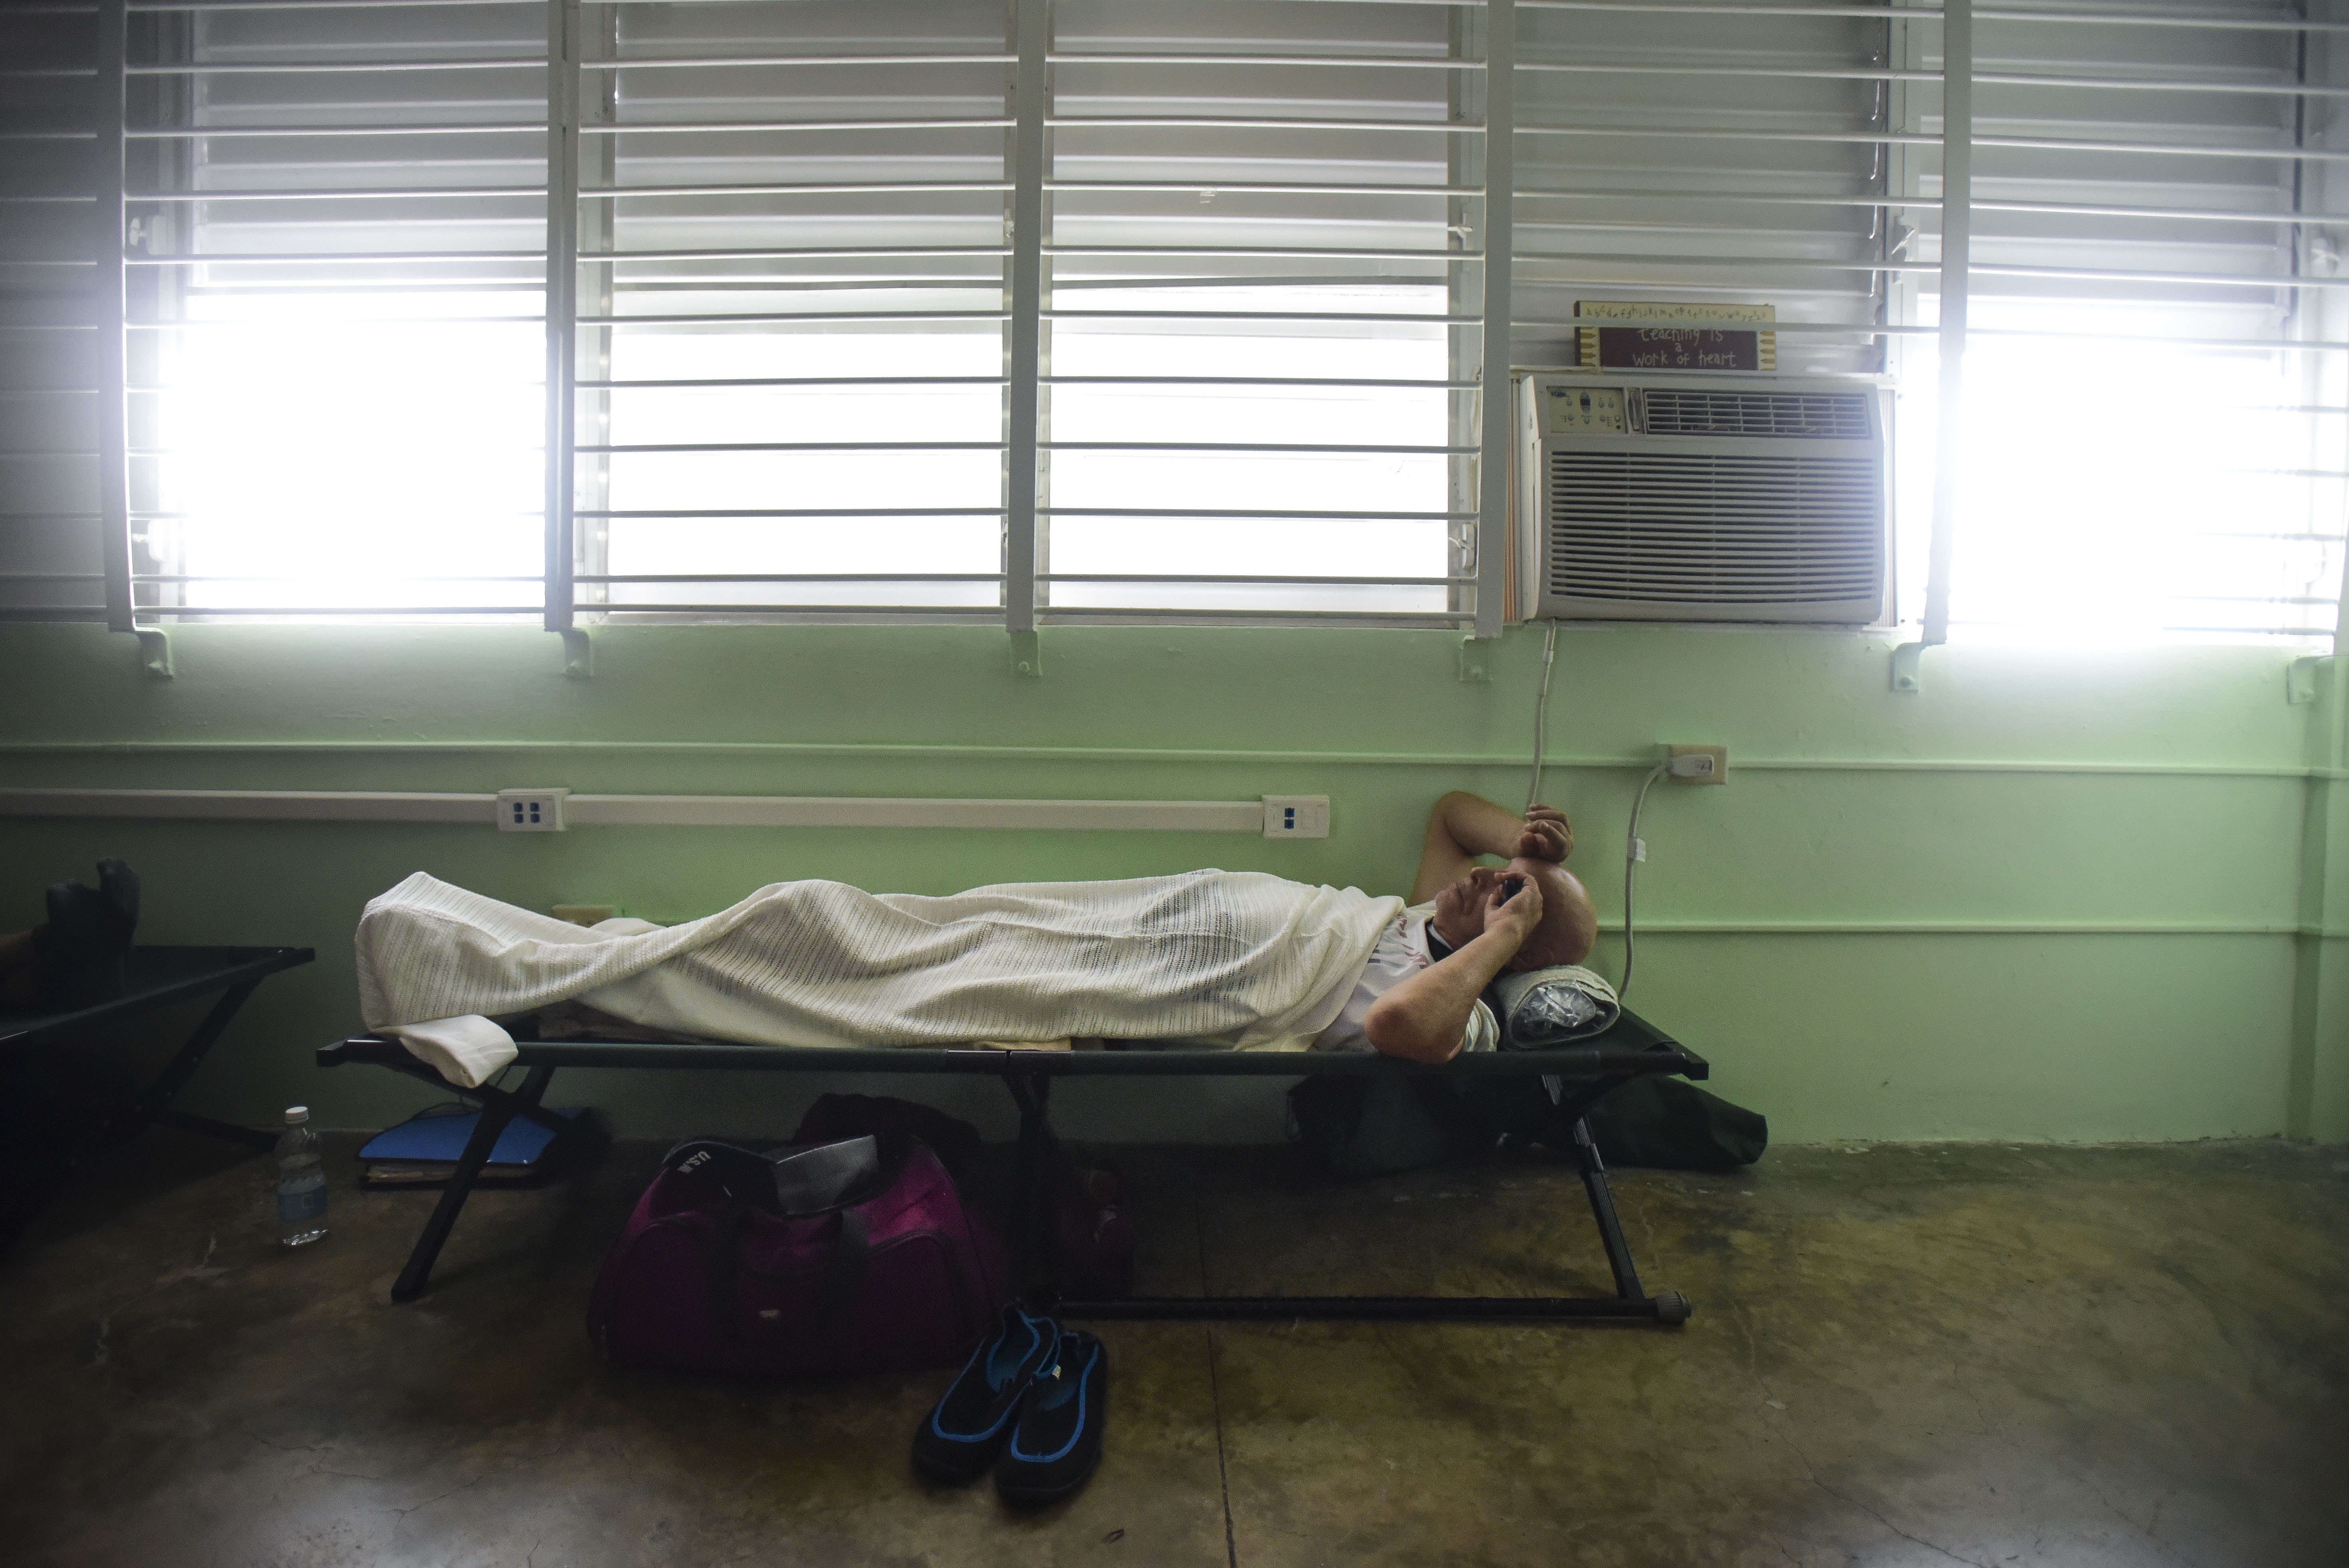 A man rests on a cot inside a shelter set up at the Berta Zalduondo elementary school in Fajardo, Puerto Rico, Wednesday, Sept. 6, 2017.